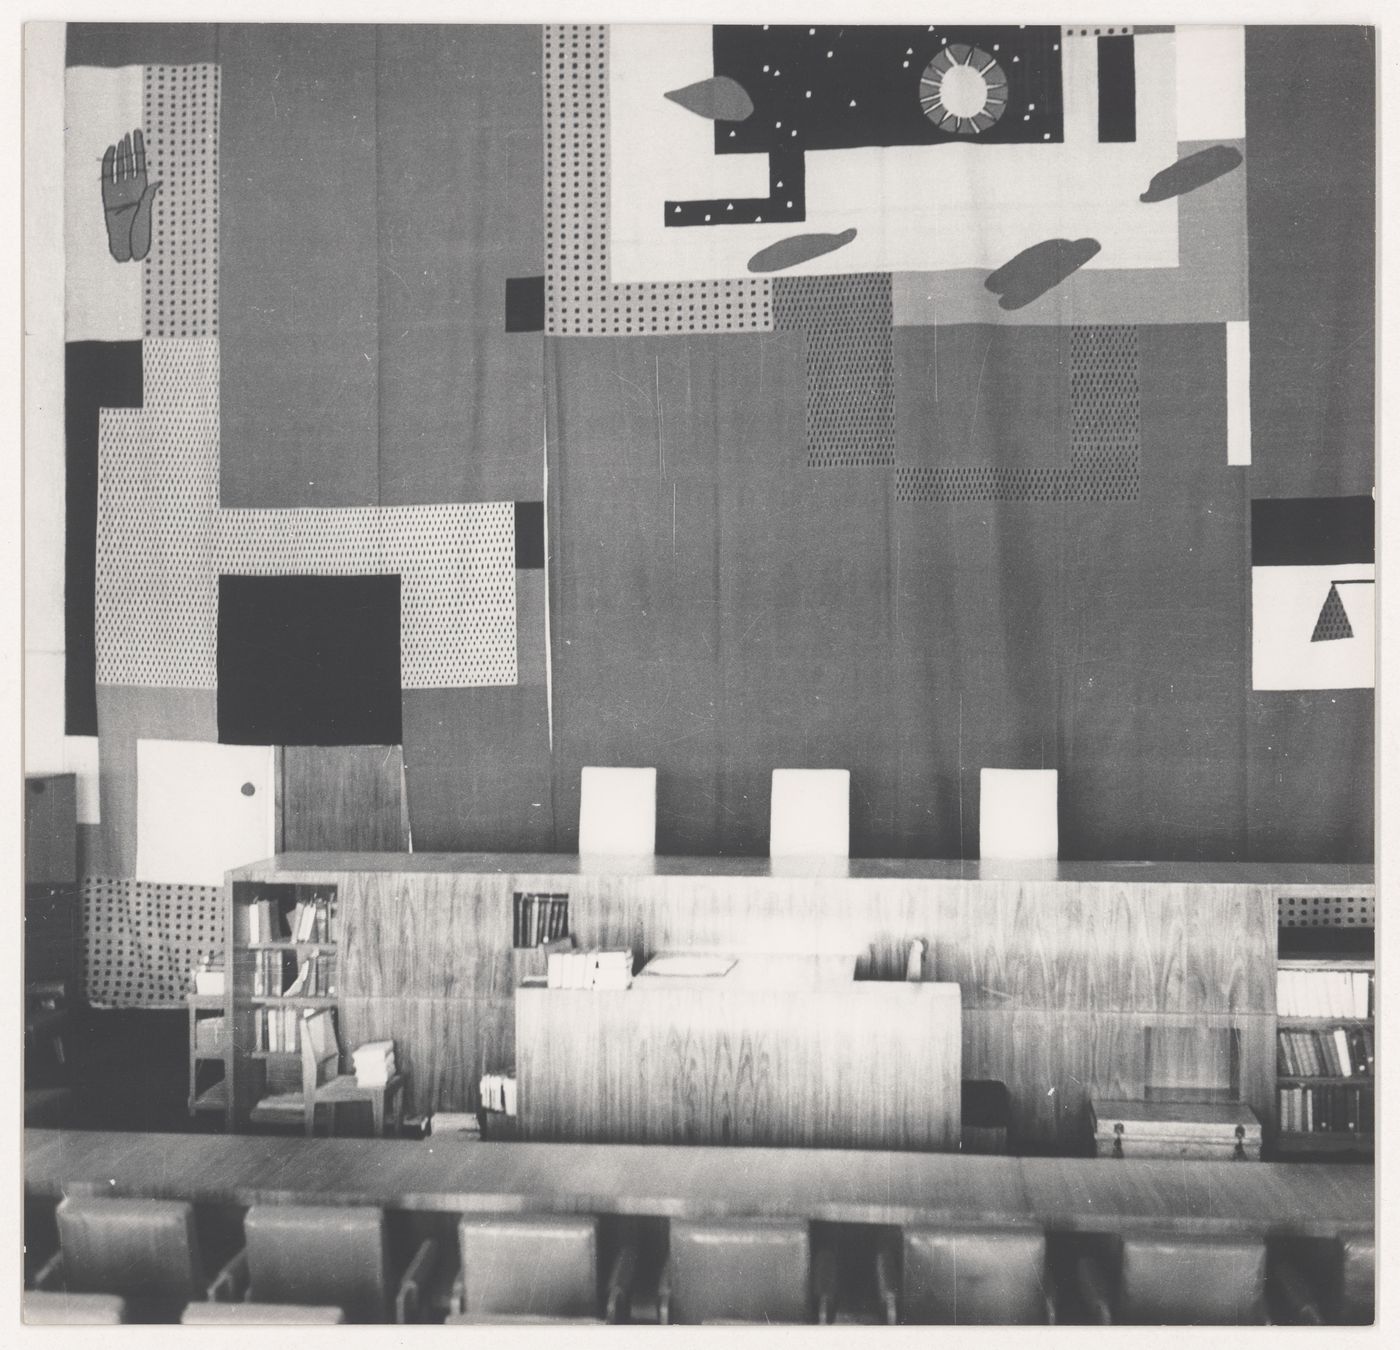 Partial view of a High Court's tapestry designed by Le Corbusier, Chandigarh, India